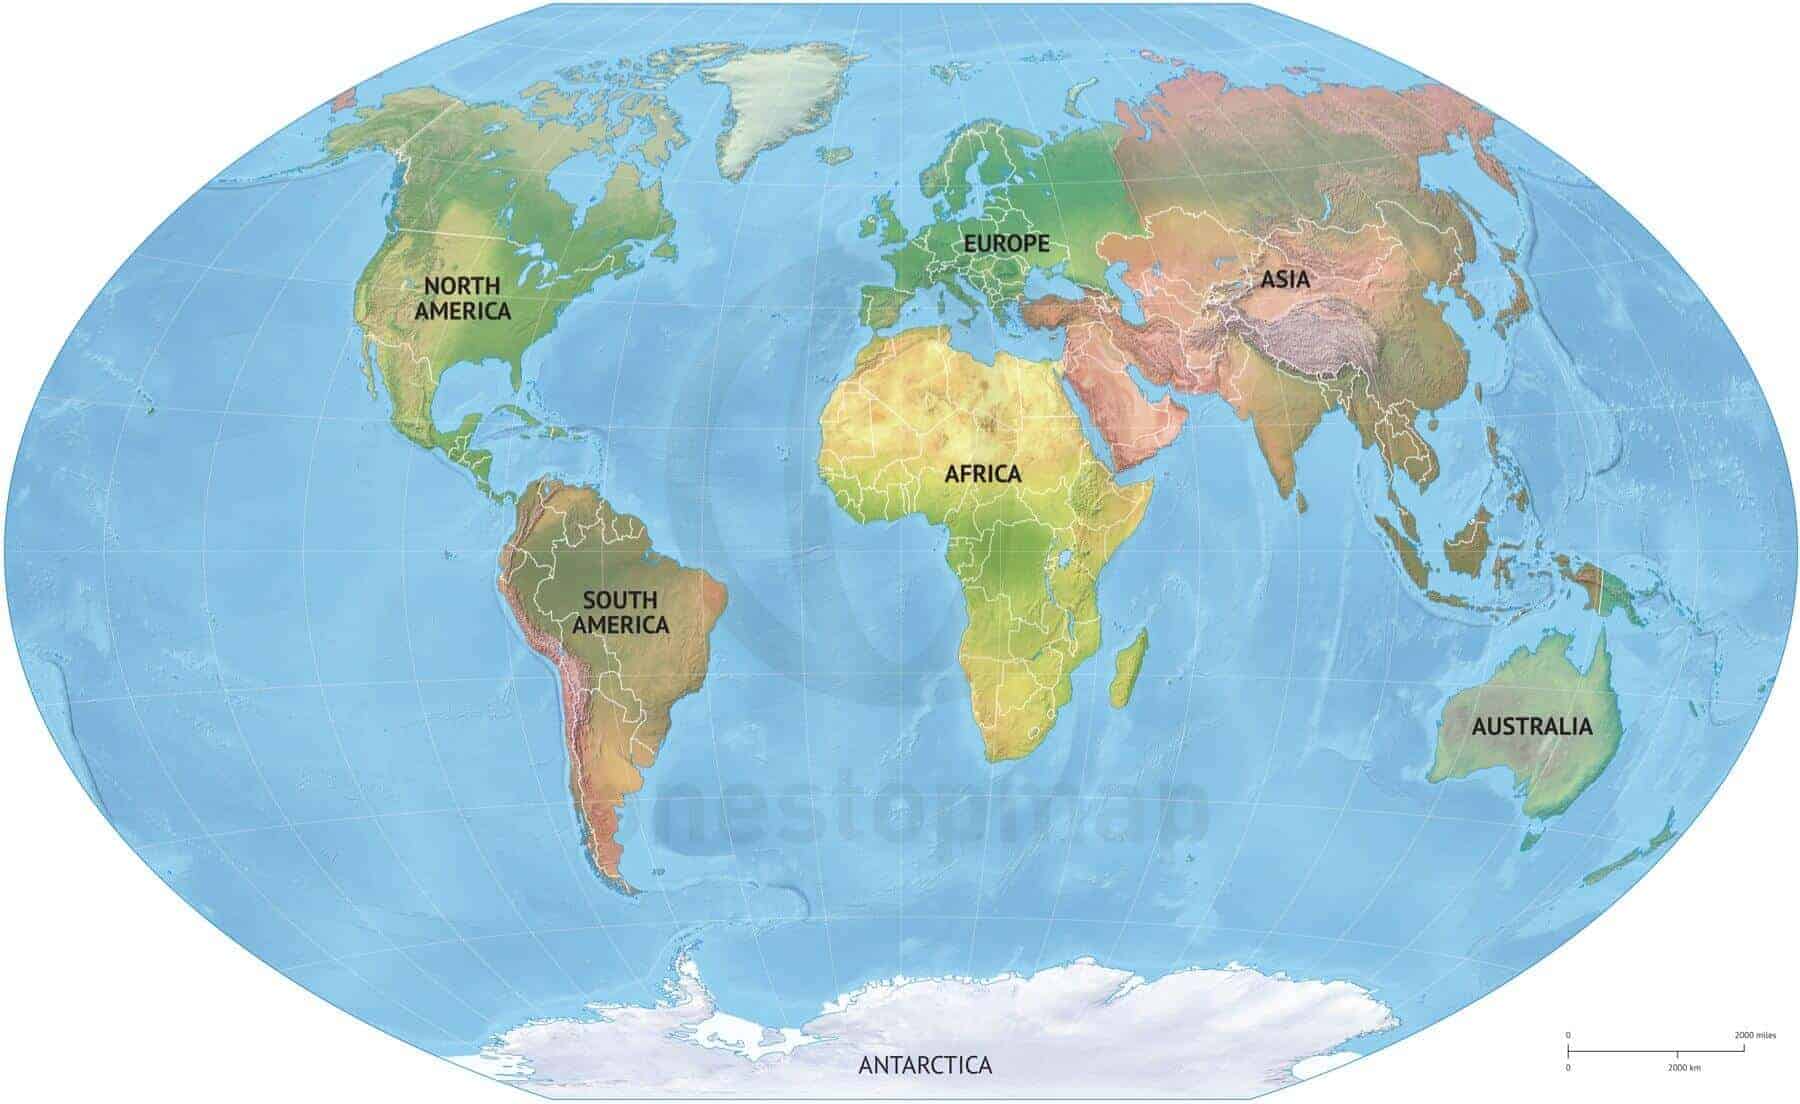 World Map Showing Continents And Countries